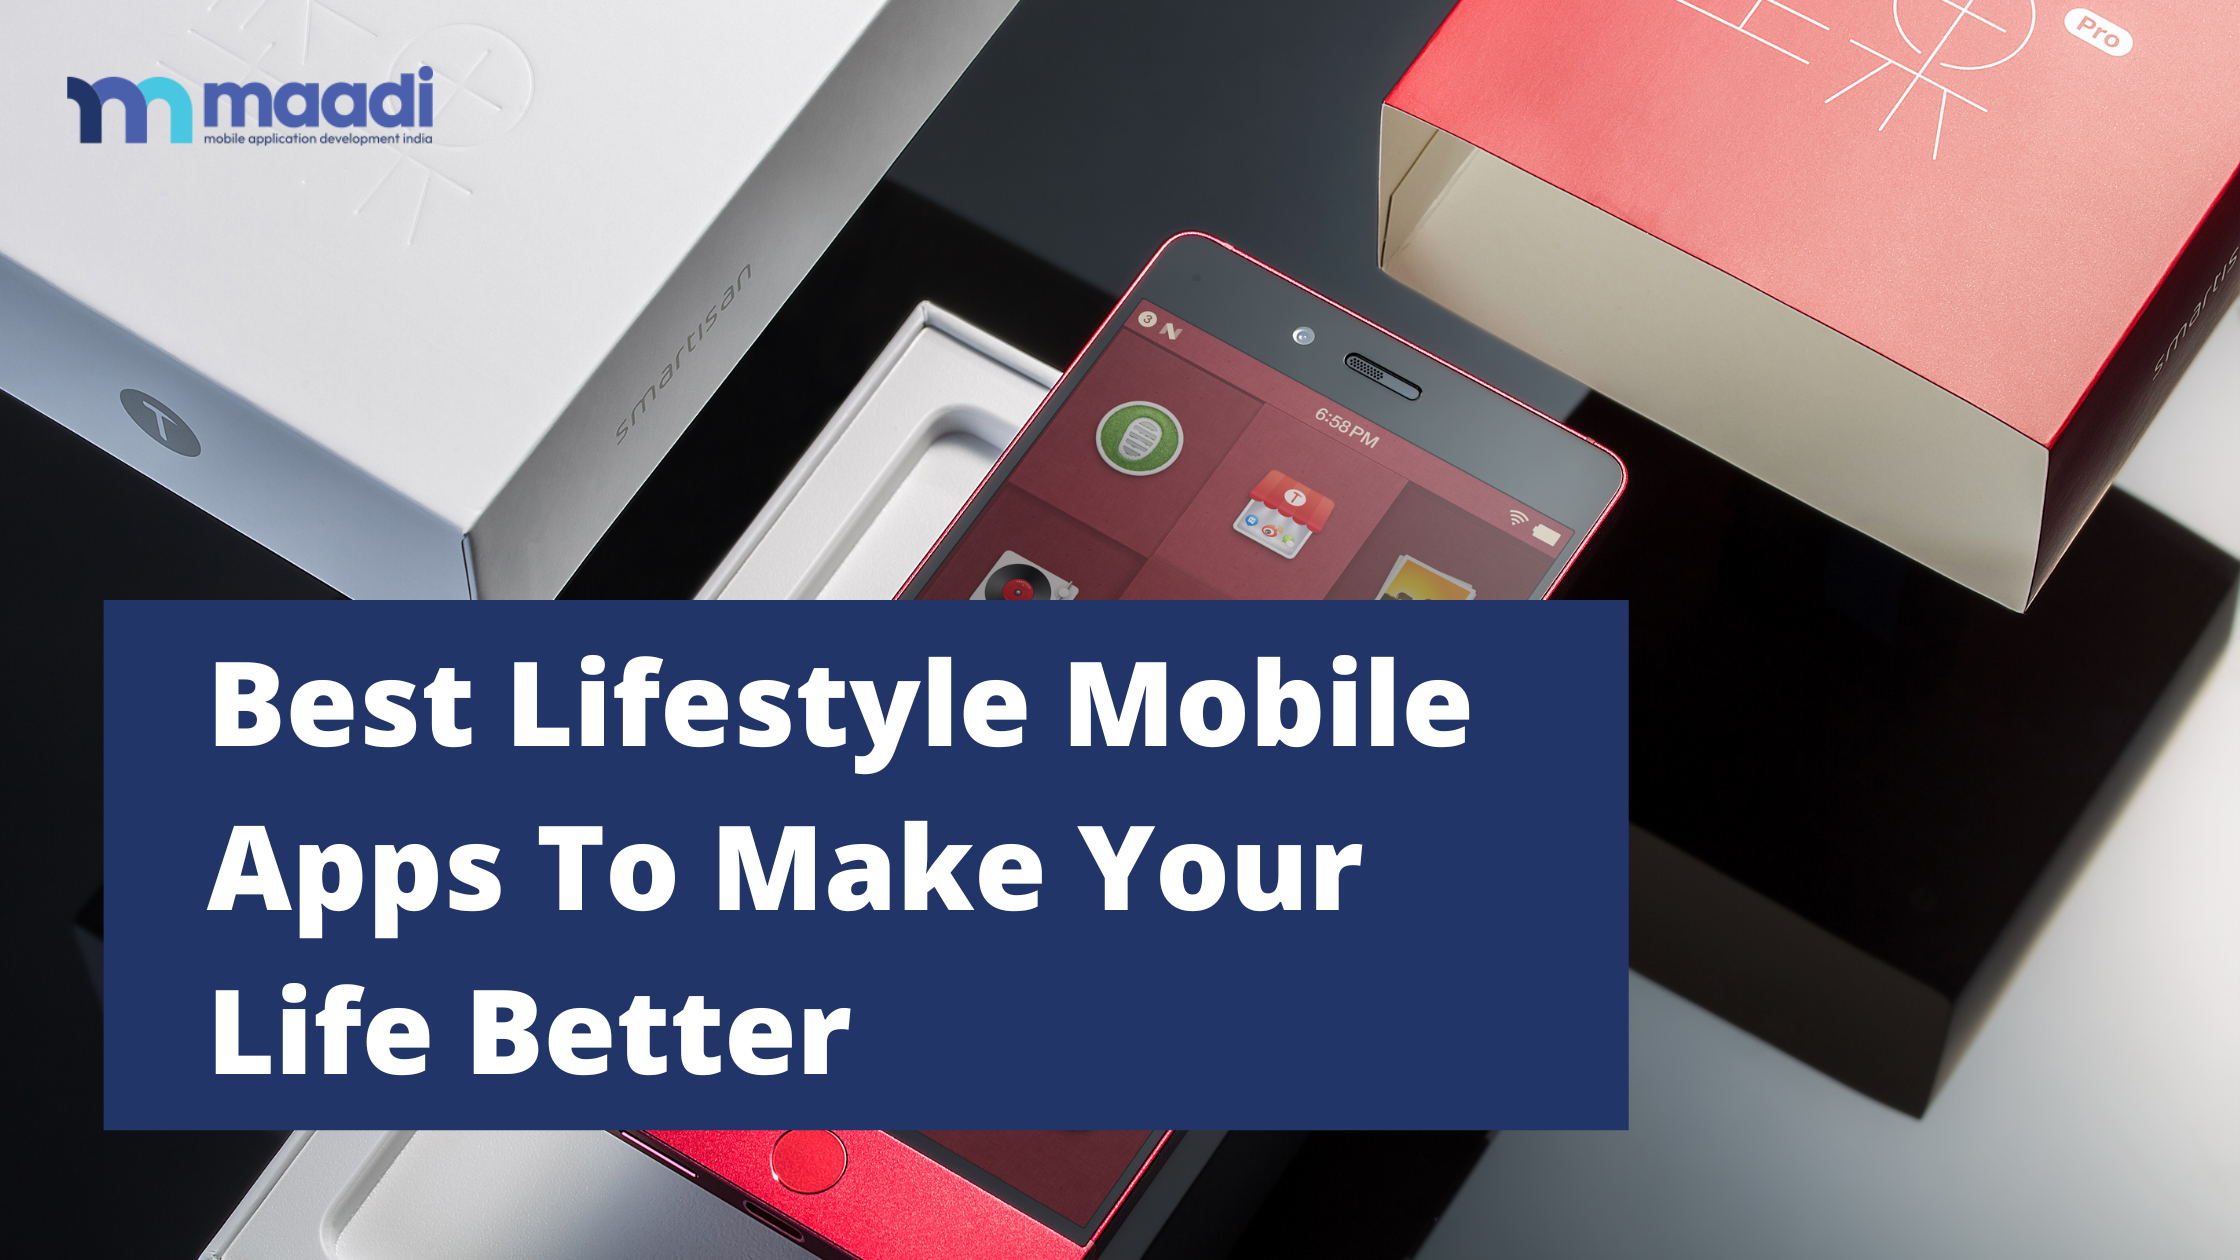 Best Lifestyle Mobile Apps To Make Your Life Better